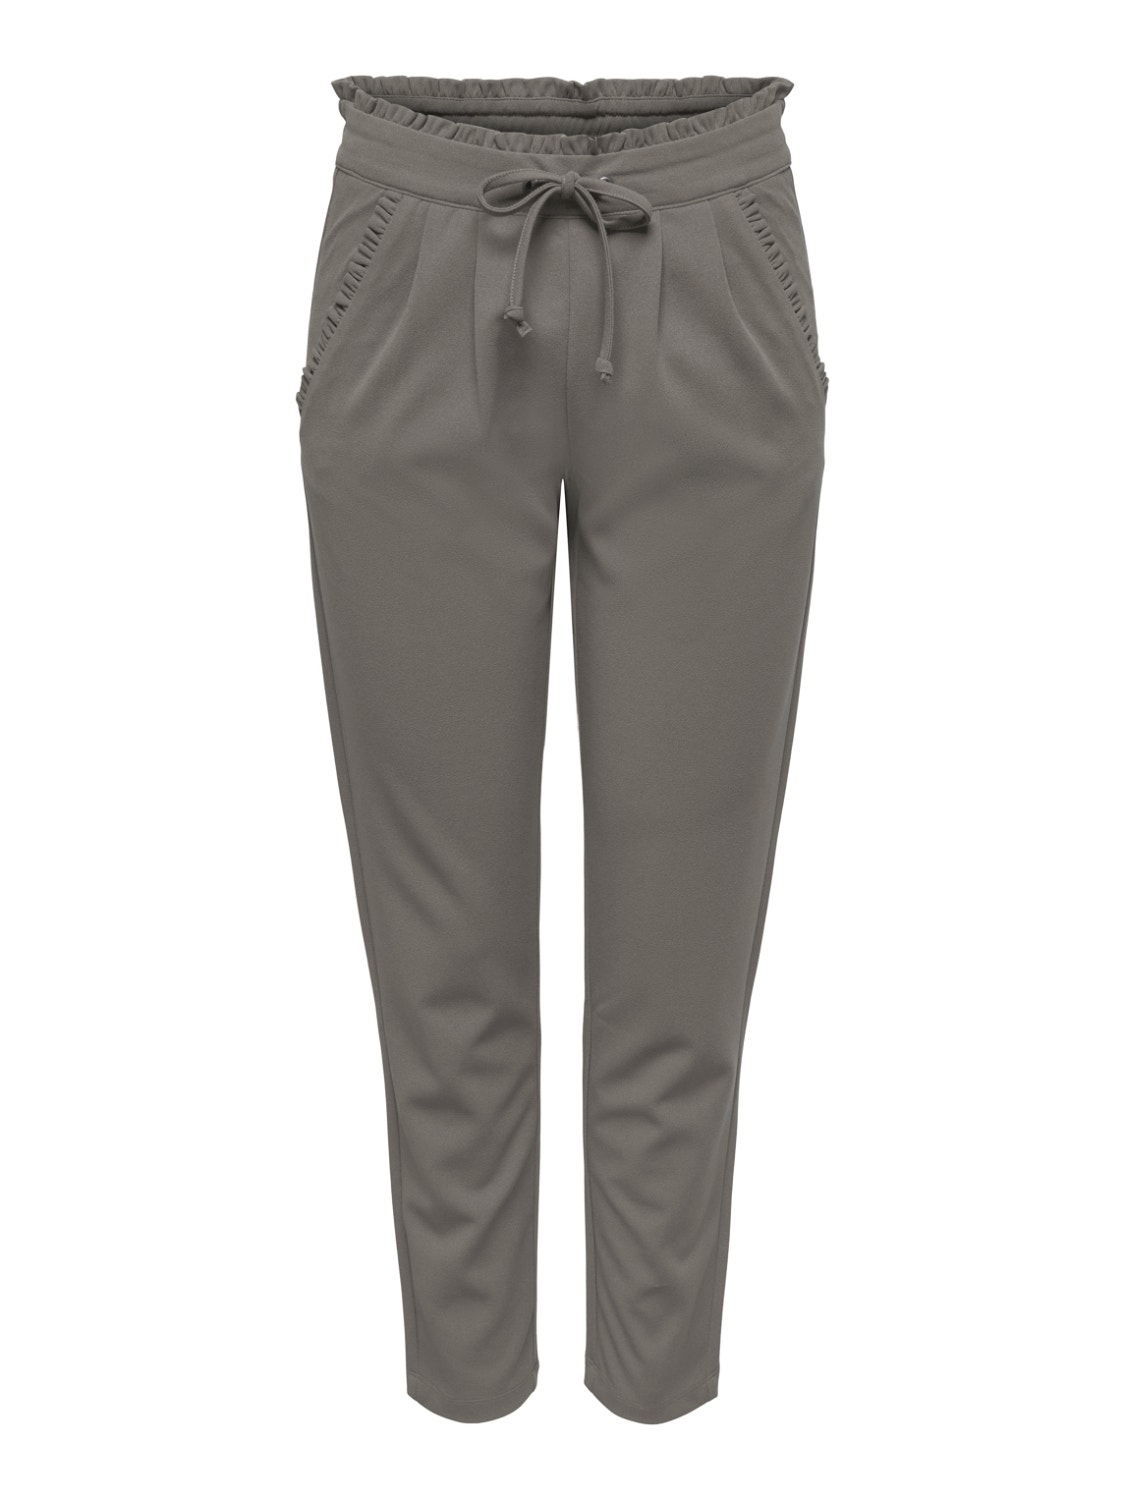 ONLY Pants with side pockets  -Driftwood - 15208415